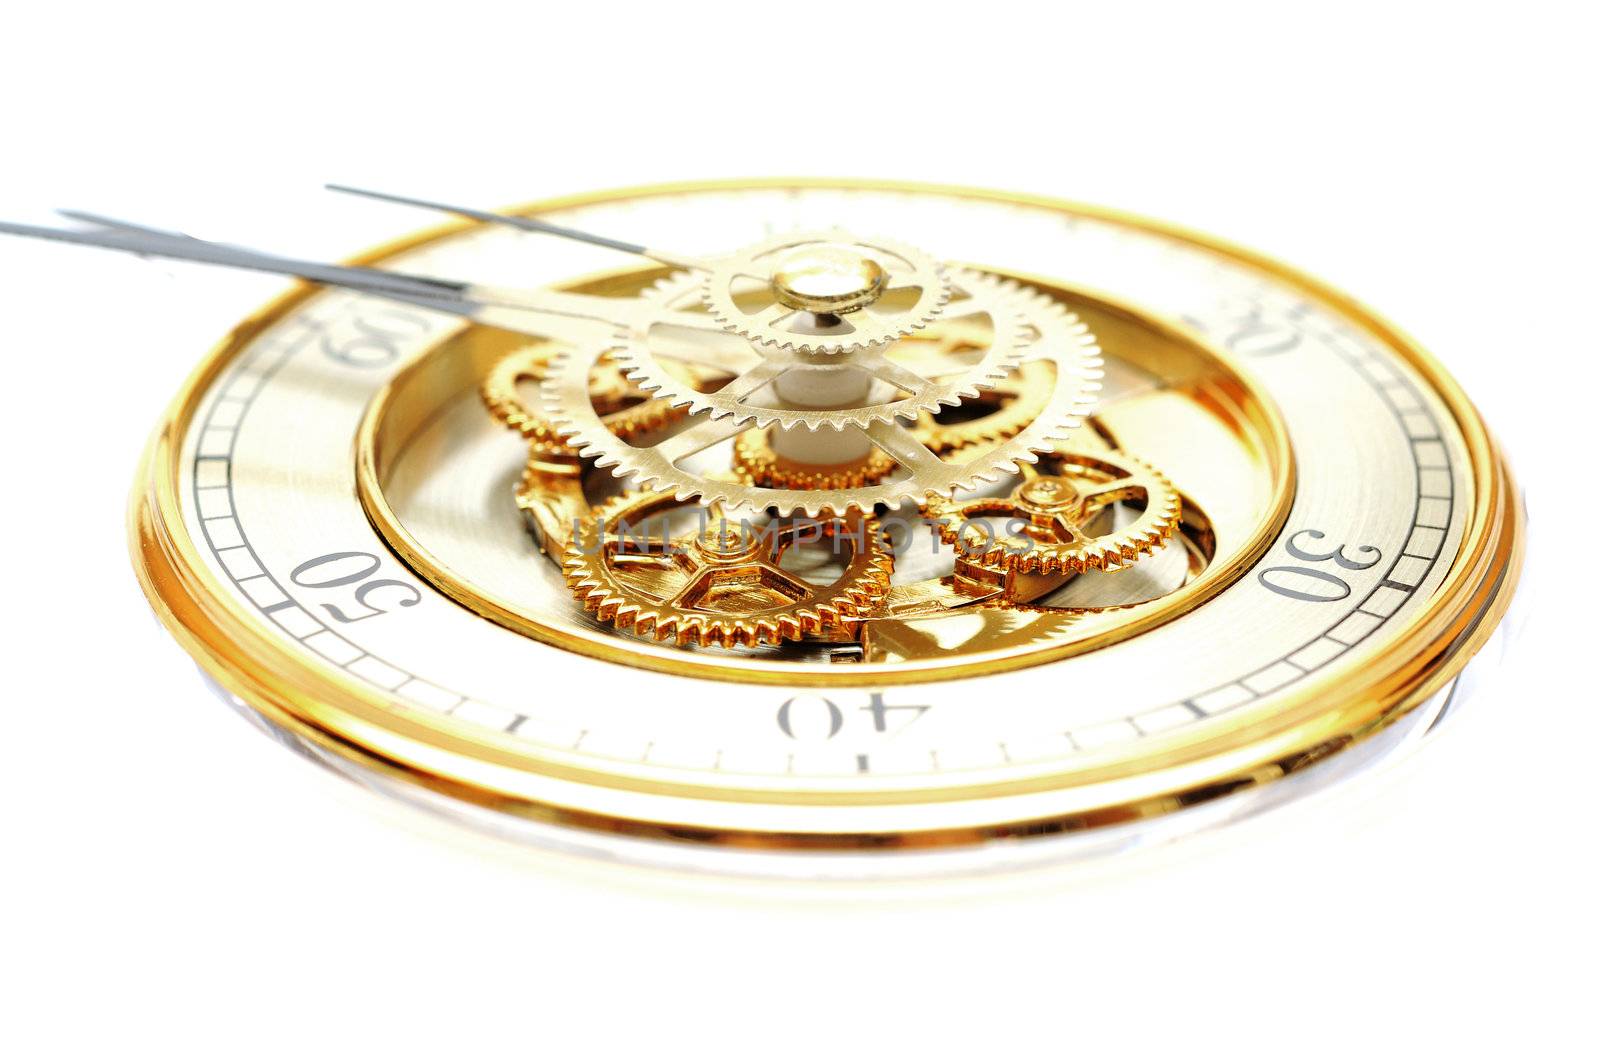 Golden Clock with gears on white